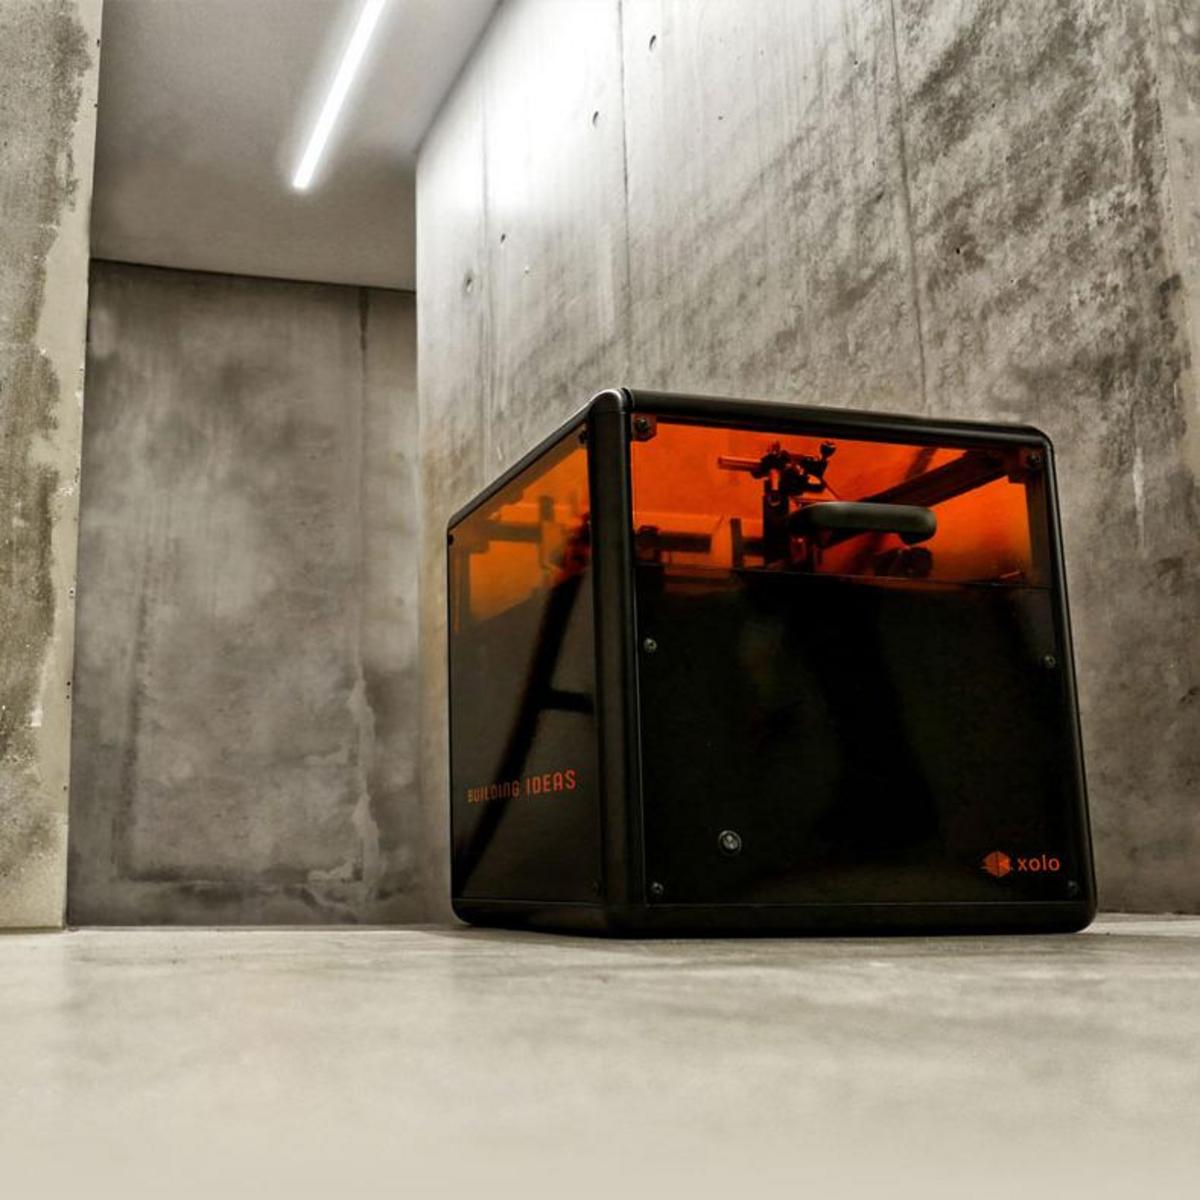 Xube, a transparent device in the shape of a cube, the 3D printer from Xolo GmbH.